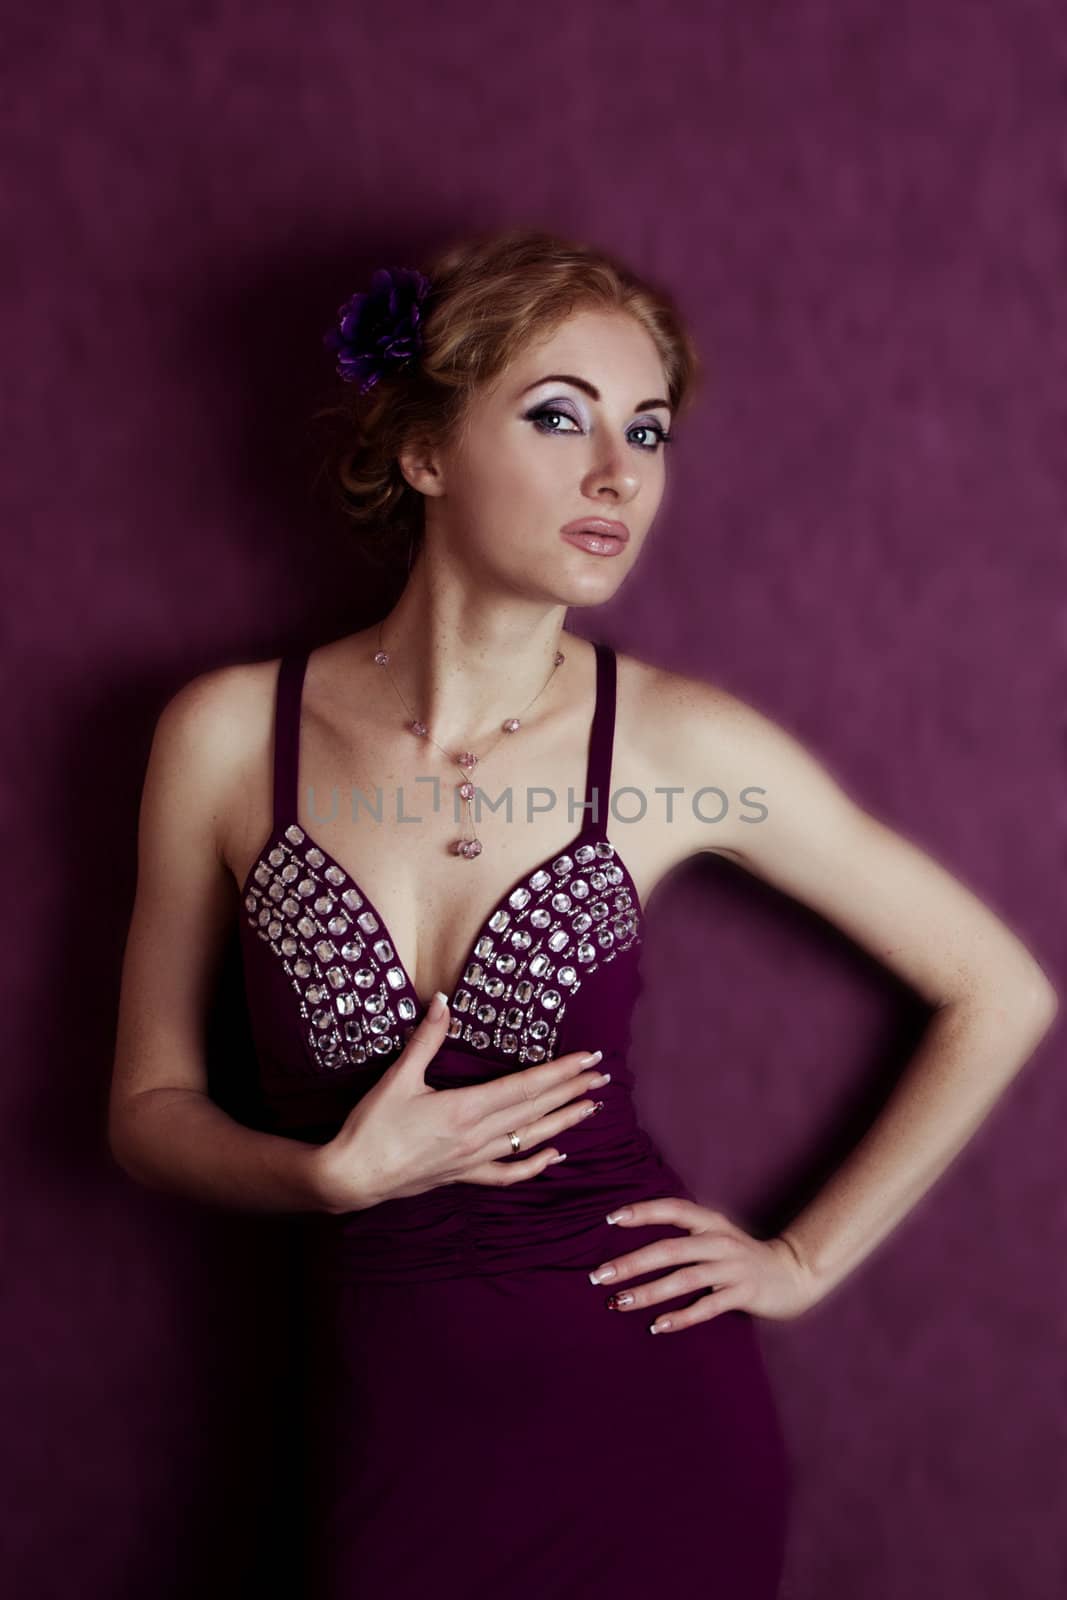 Retro-styled woman in violet dress and flower